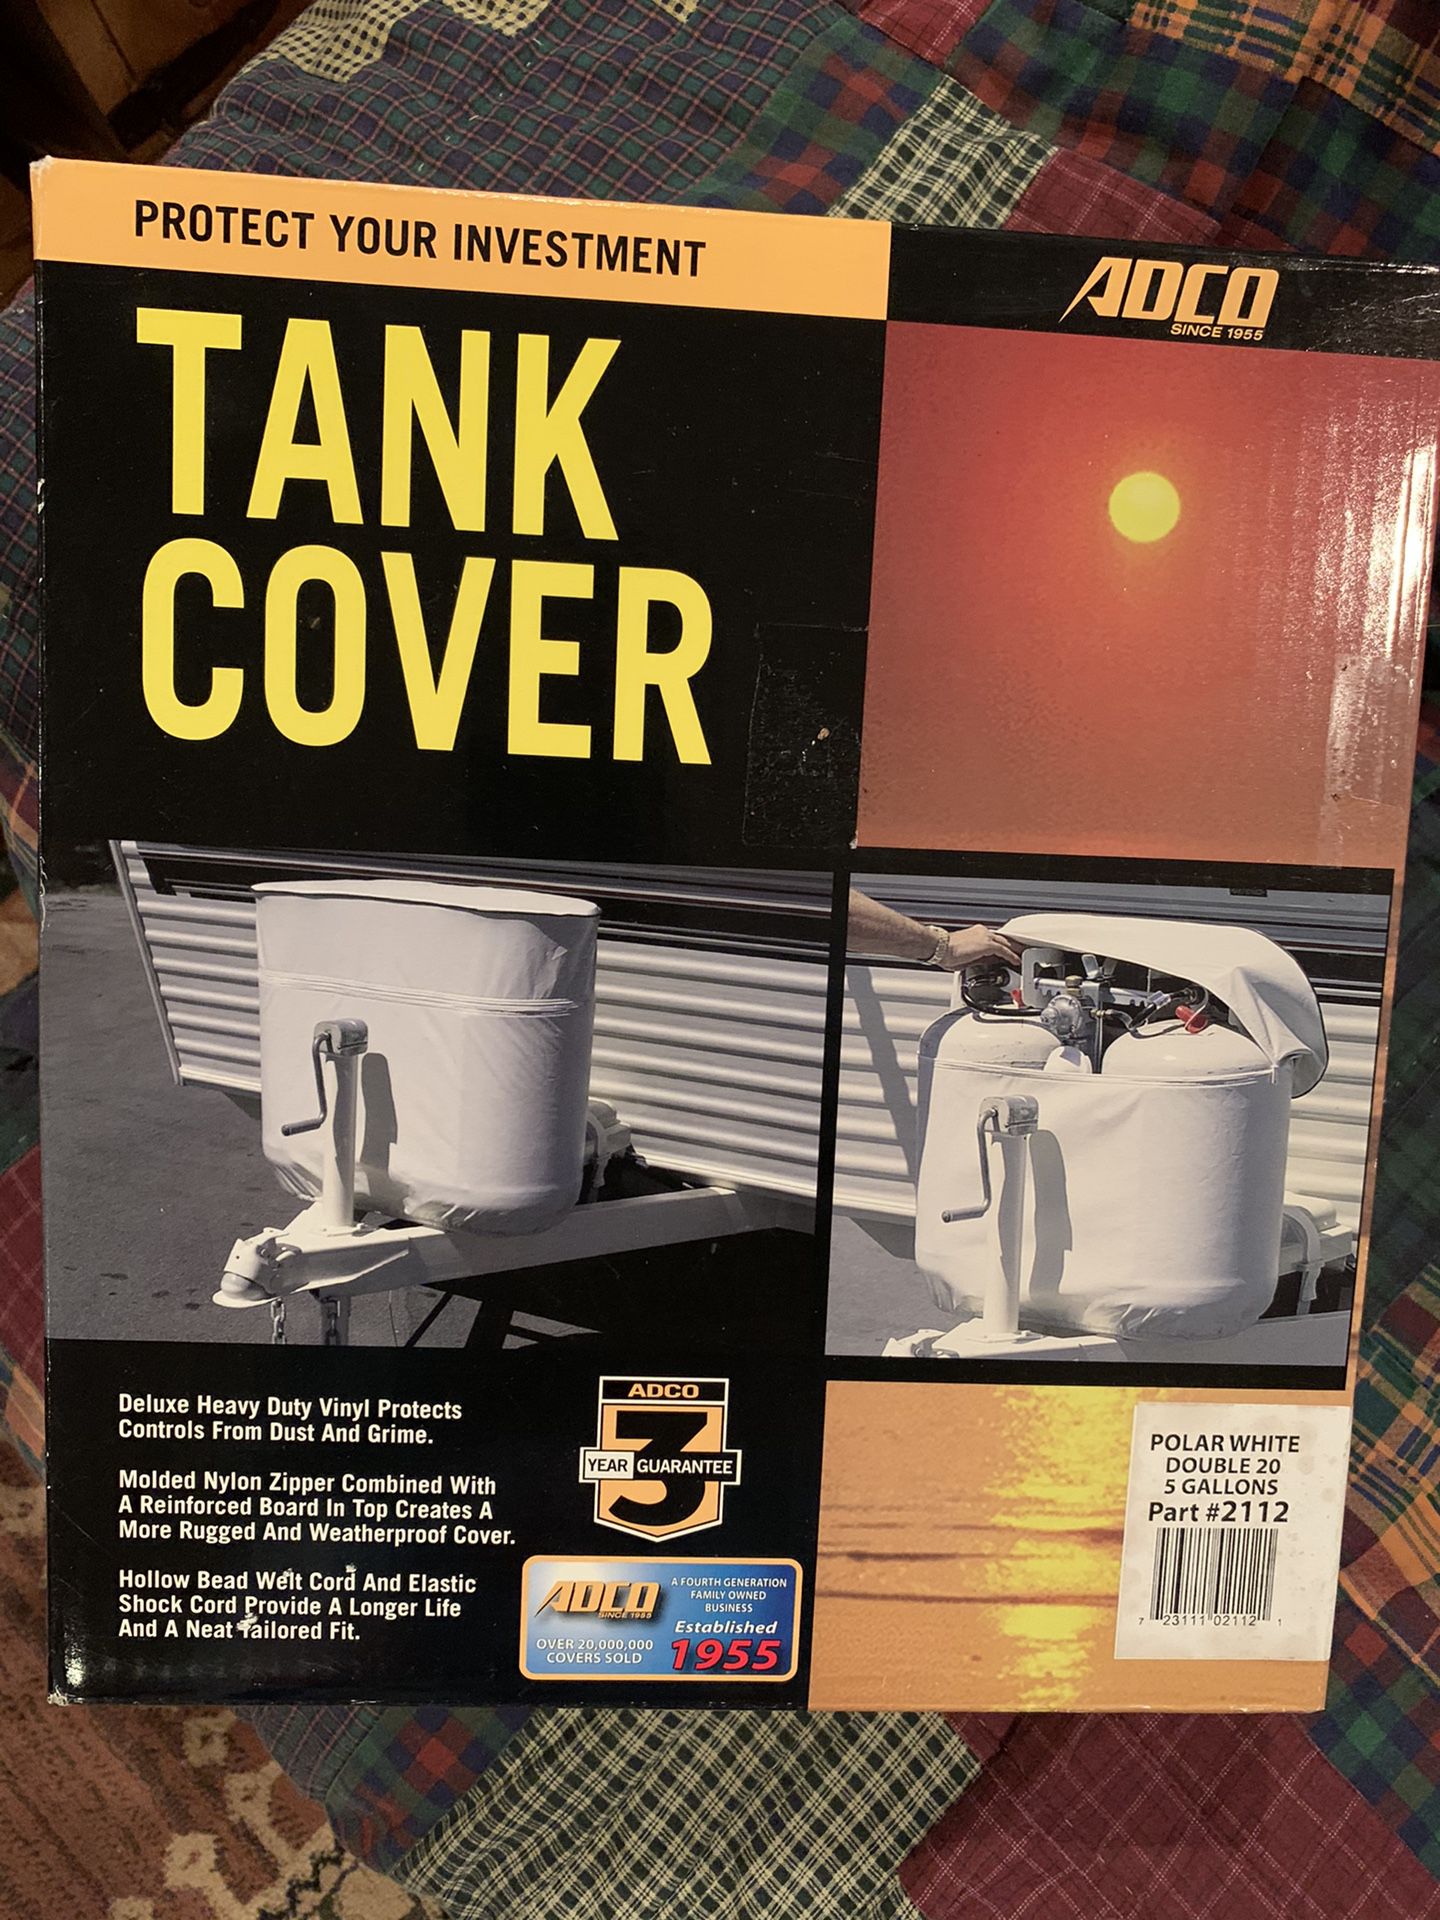 Double tank cover